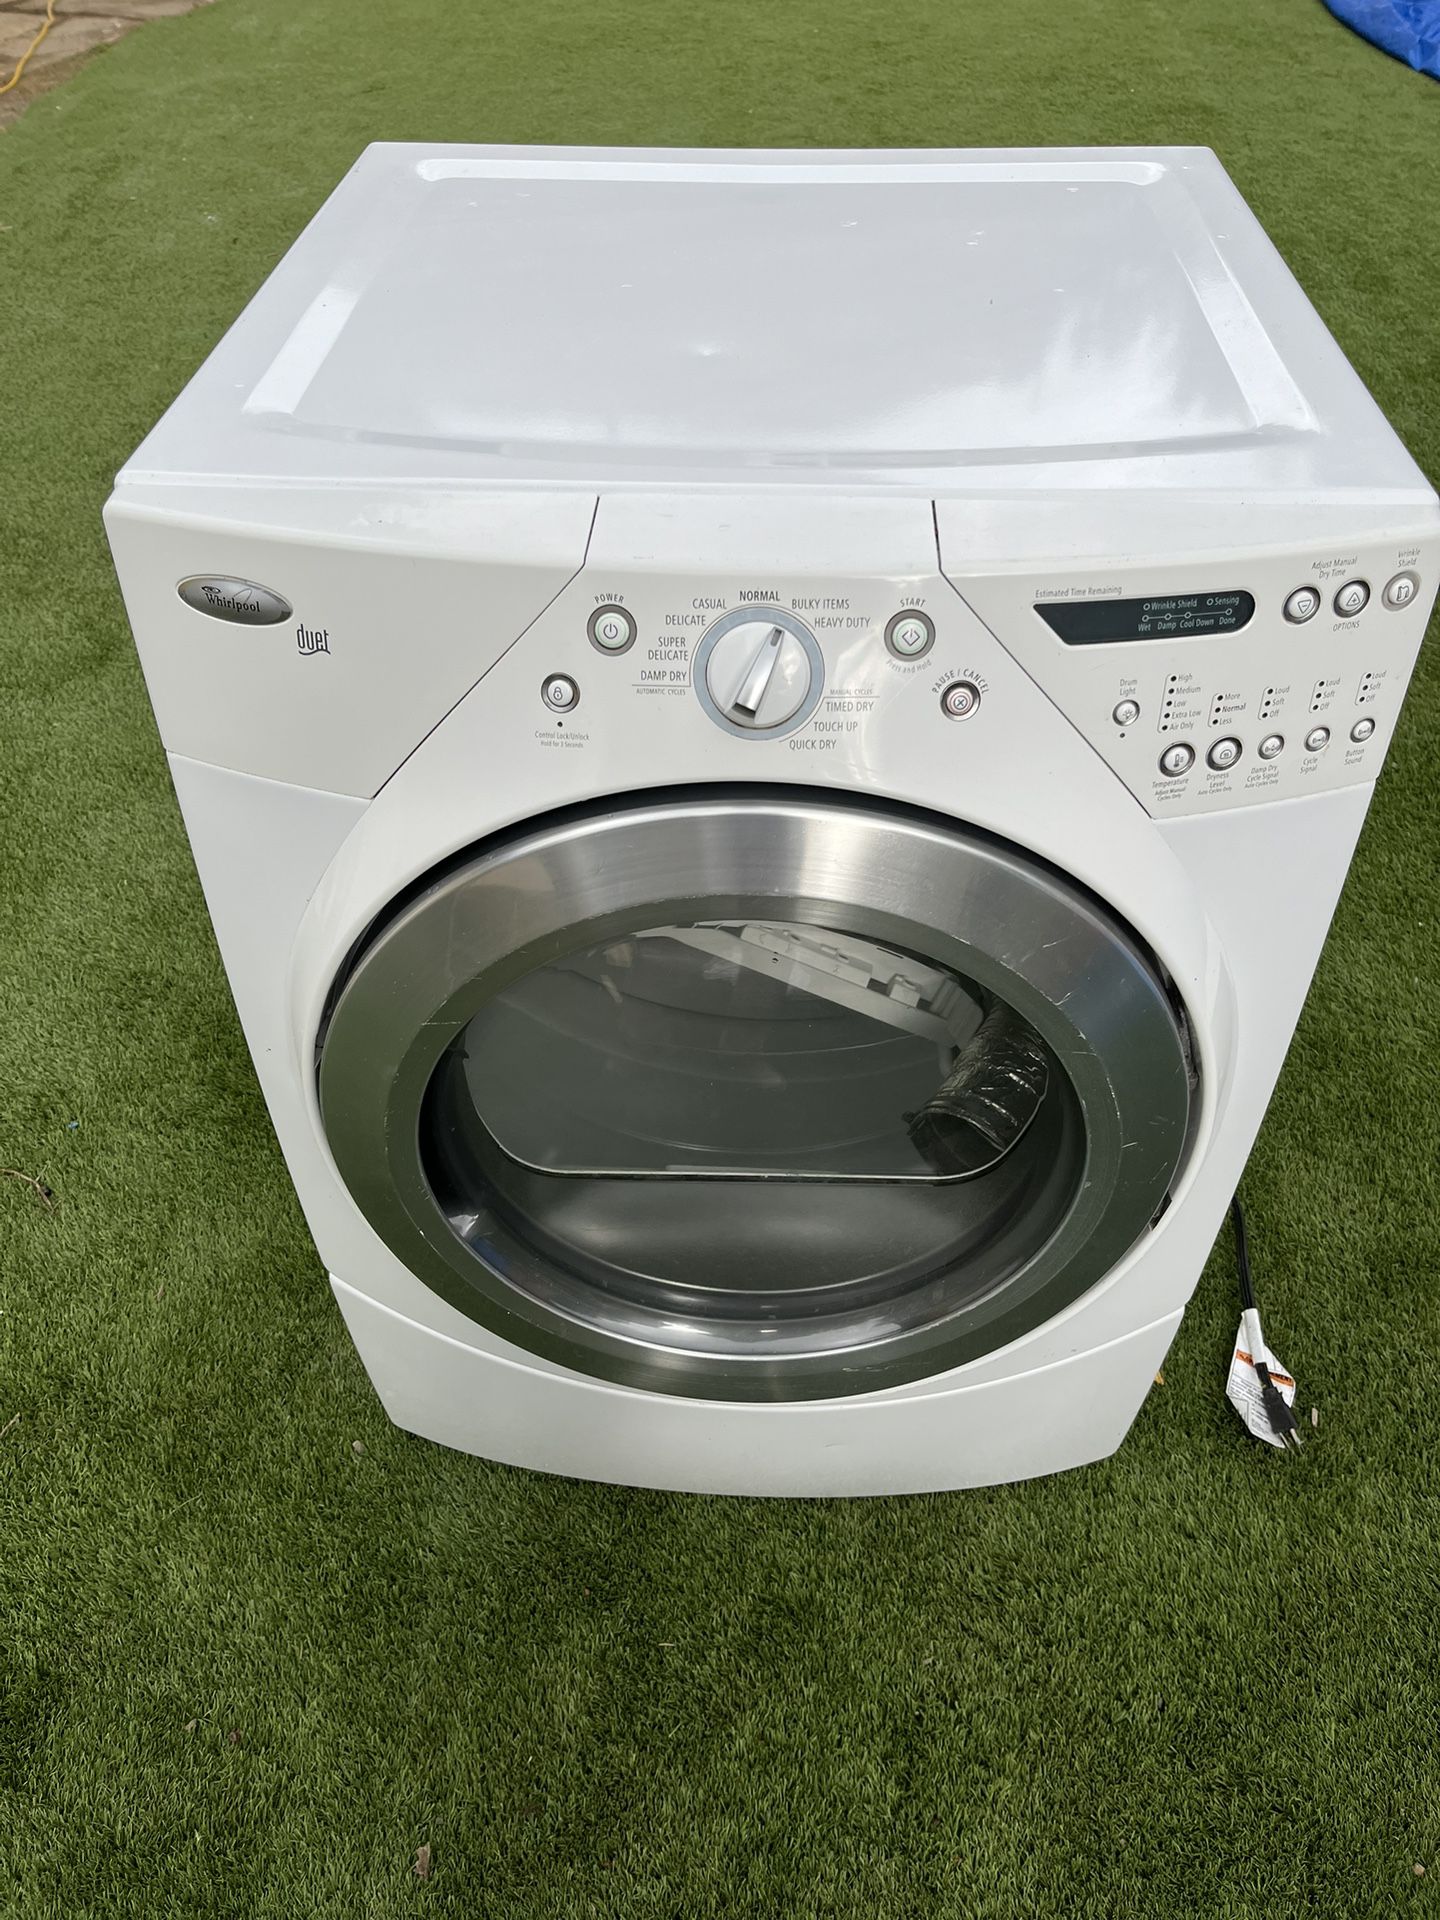 Whirlpool GAS dryer EXCELLENT CONDITION 